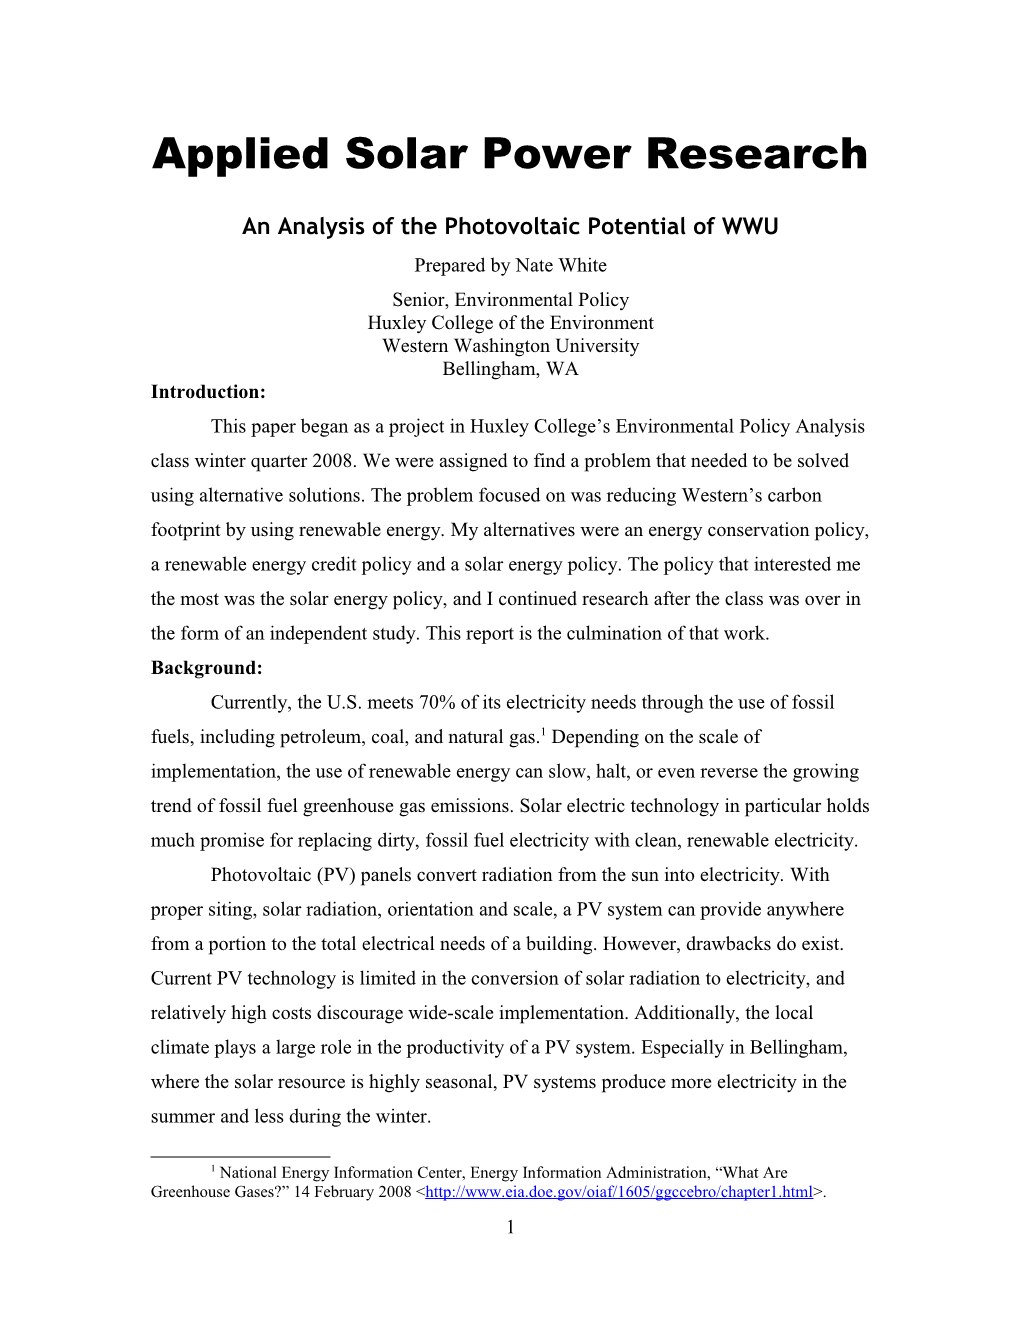 An Analysis of the Photovoltaic Potential of WWU